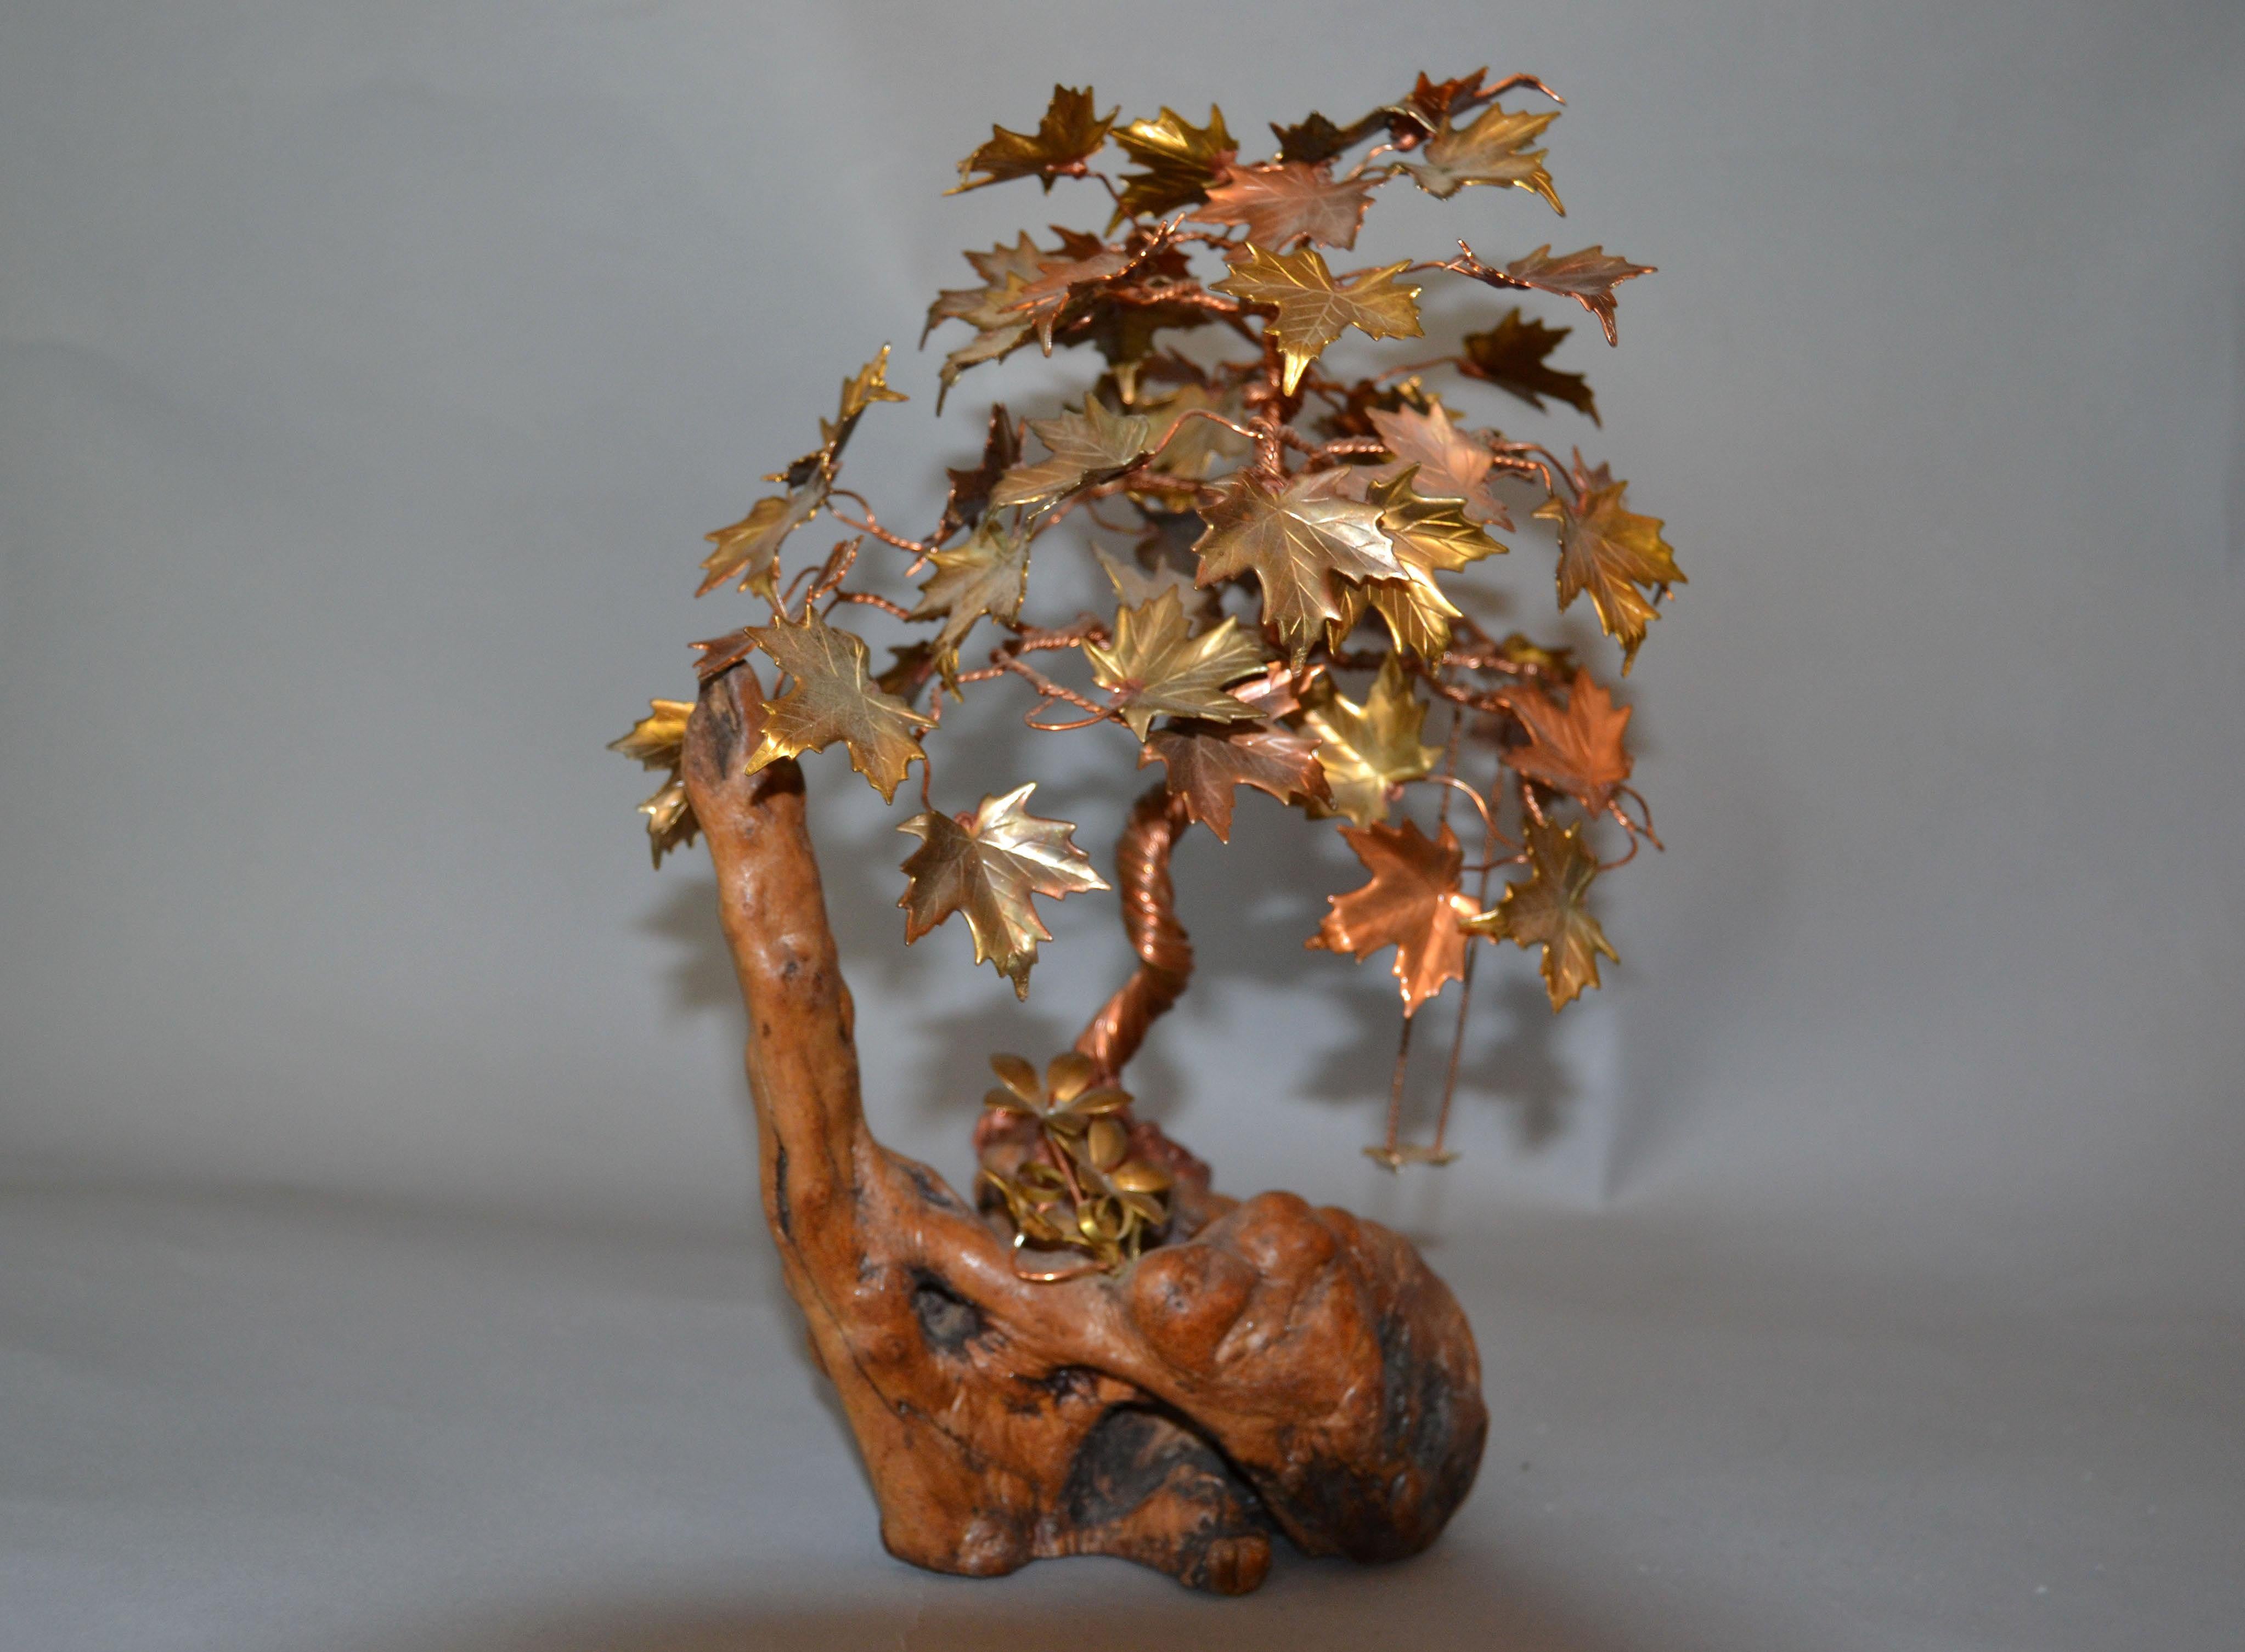 Hand-Crafted Handcrafted Bonsai Tree Sculpture in Brass Copper Bronze on a Burl Wood Base For Sale